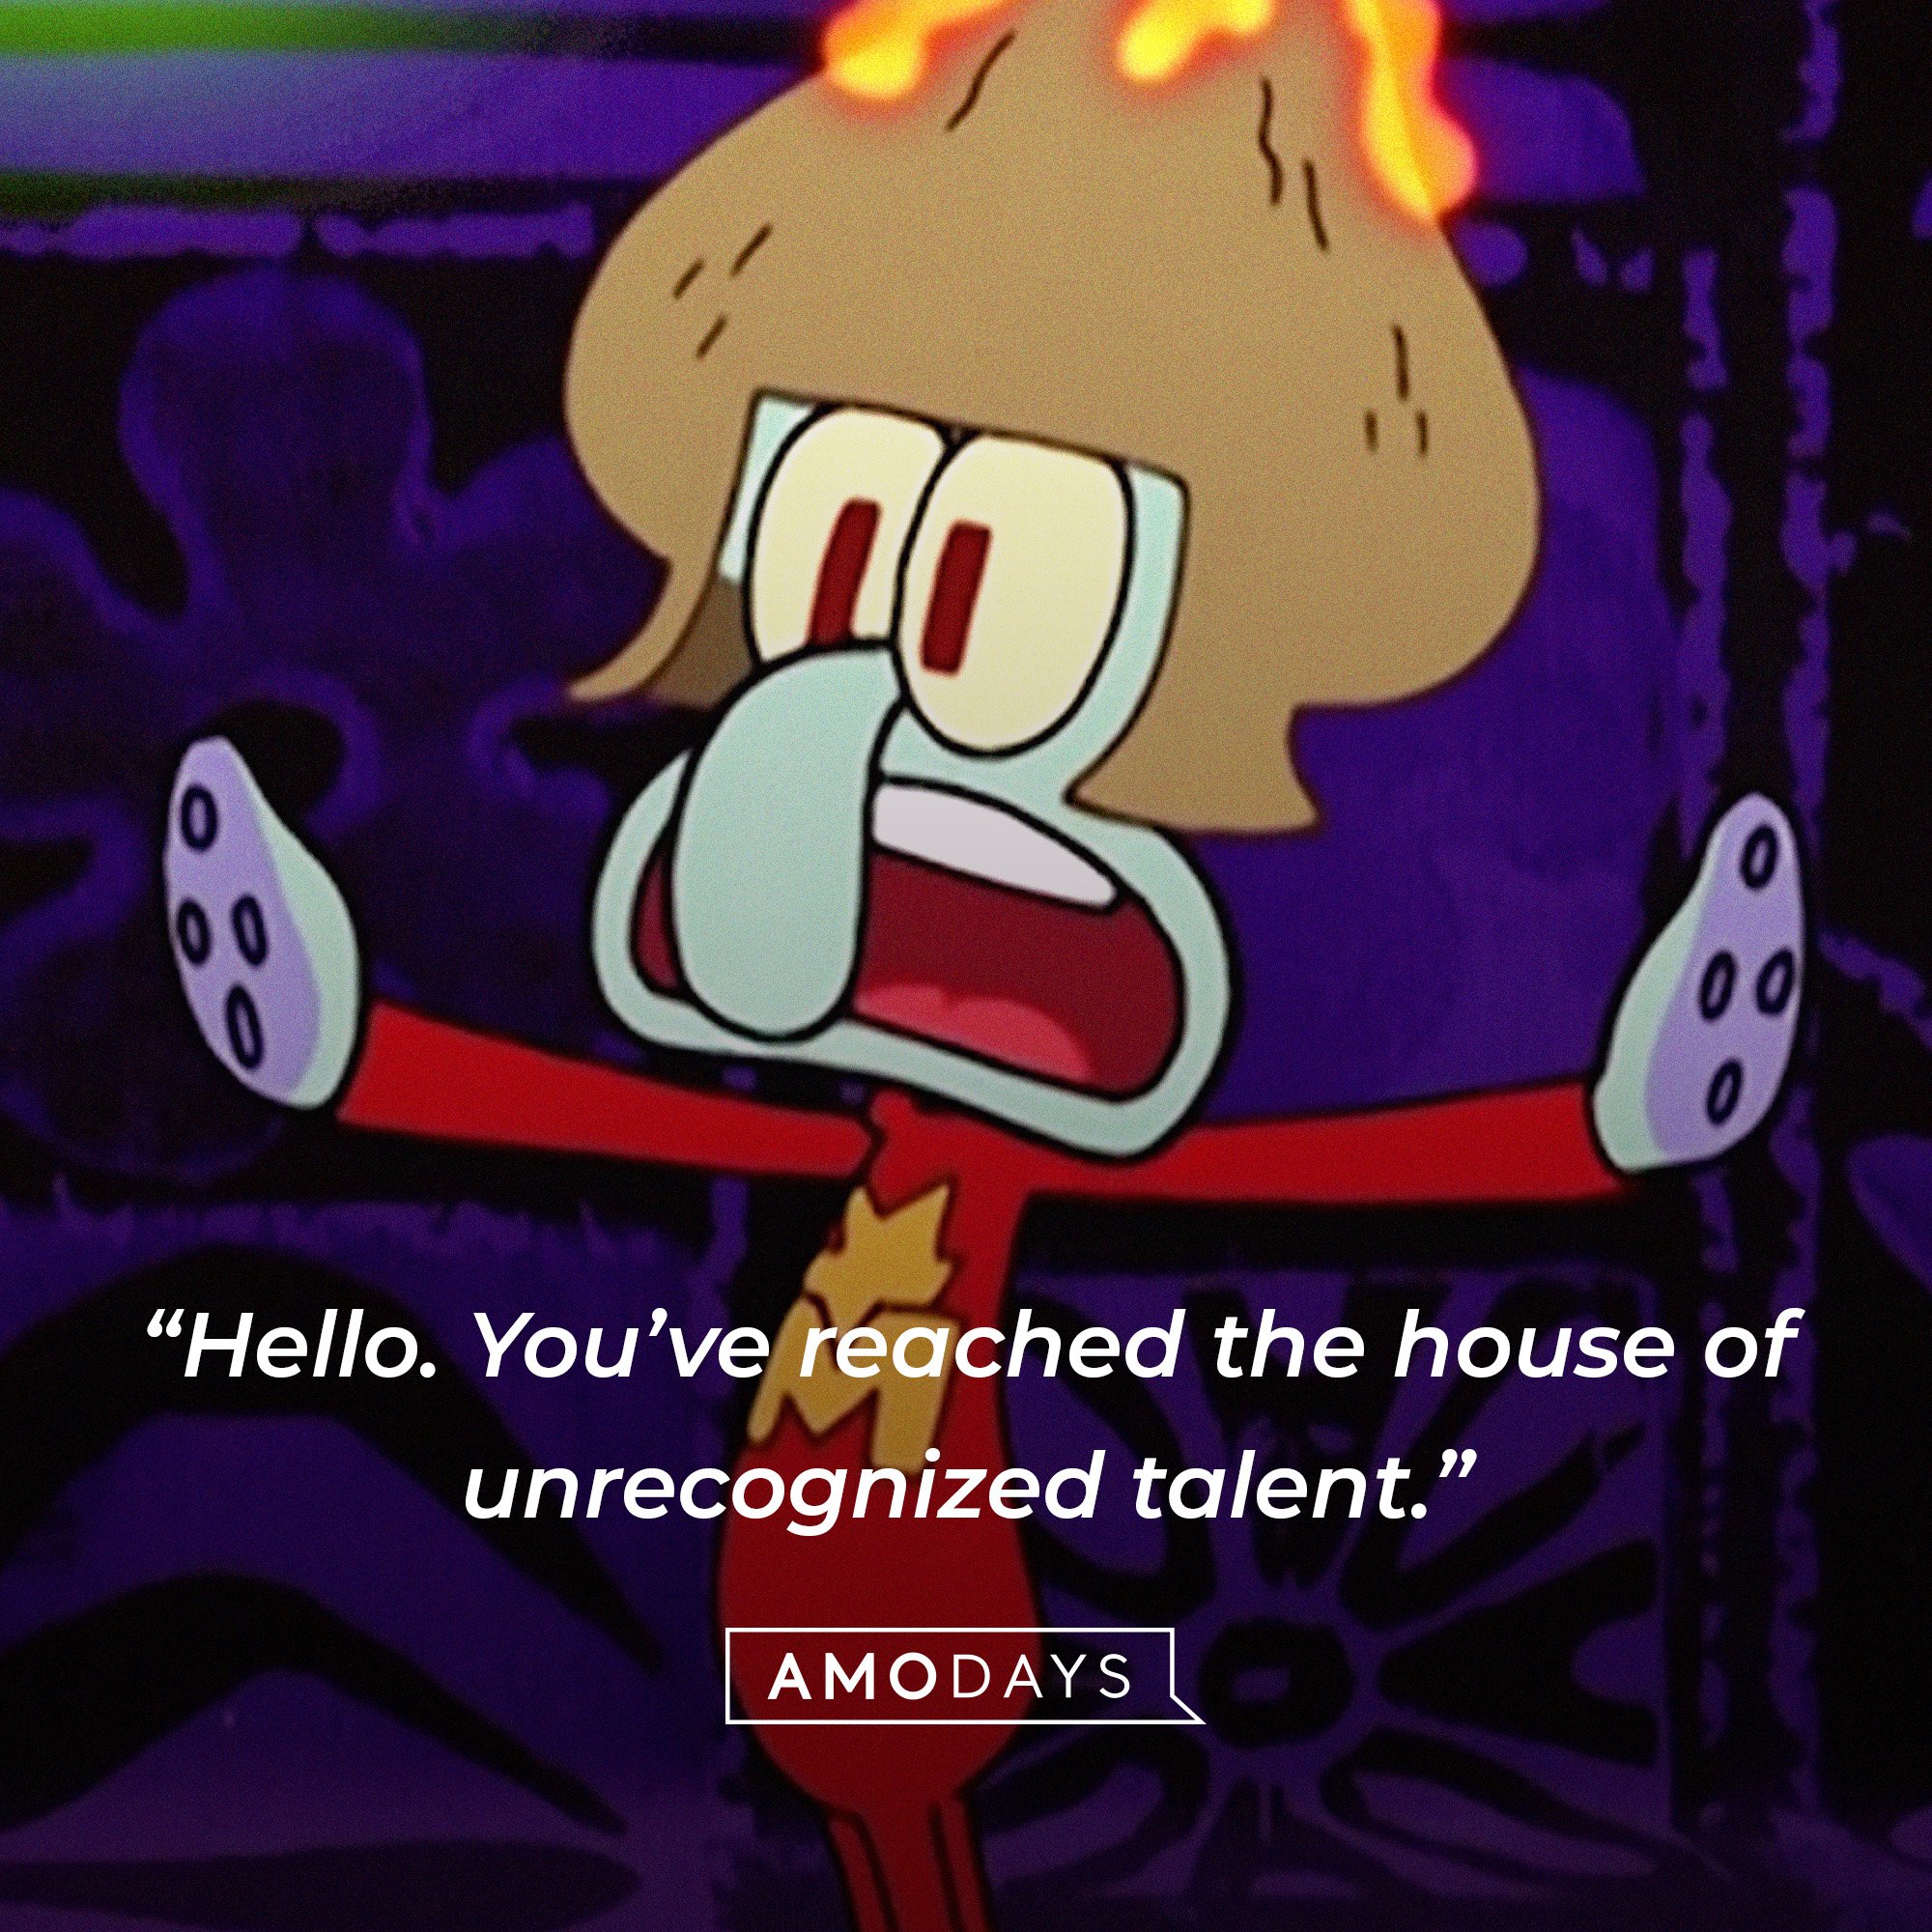 Squidward Tentacles’ quote: “Hello. You’ve reached the house of unrecognized talent.” | Source: AmoDays